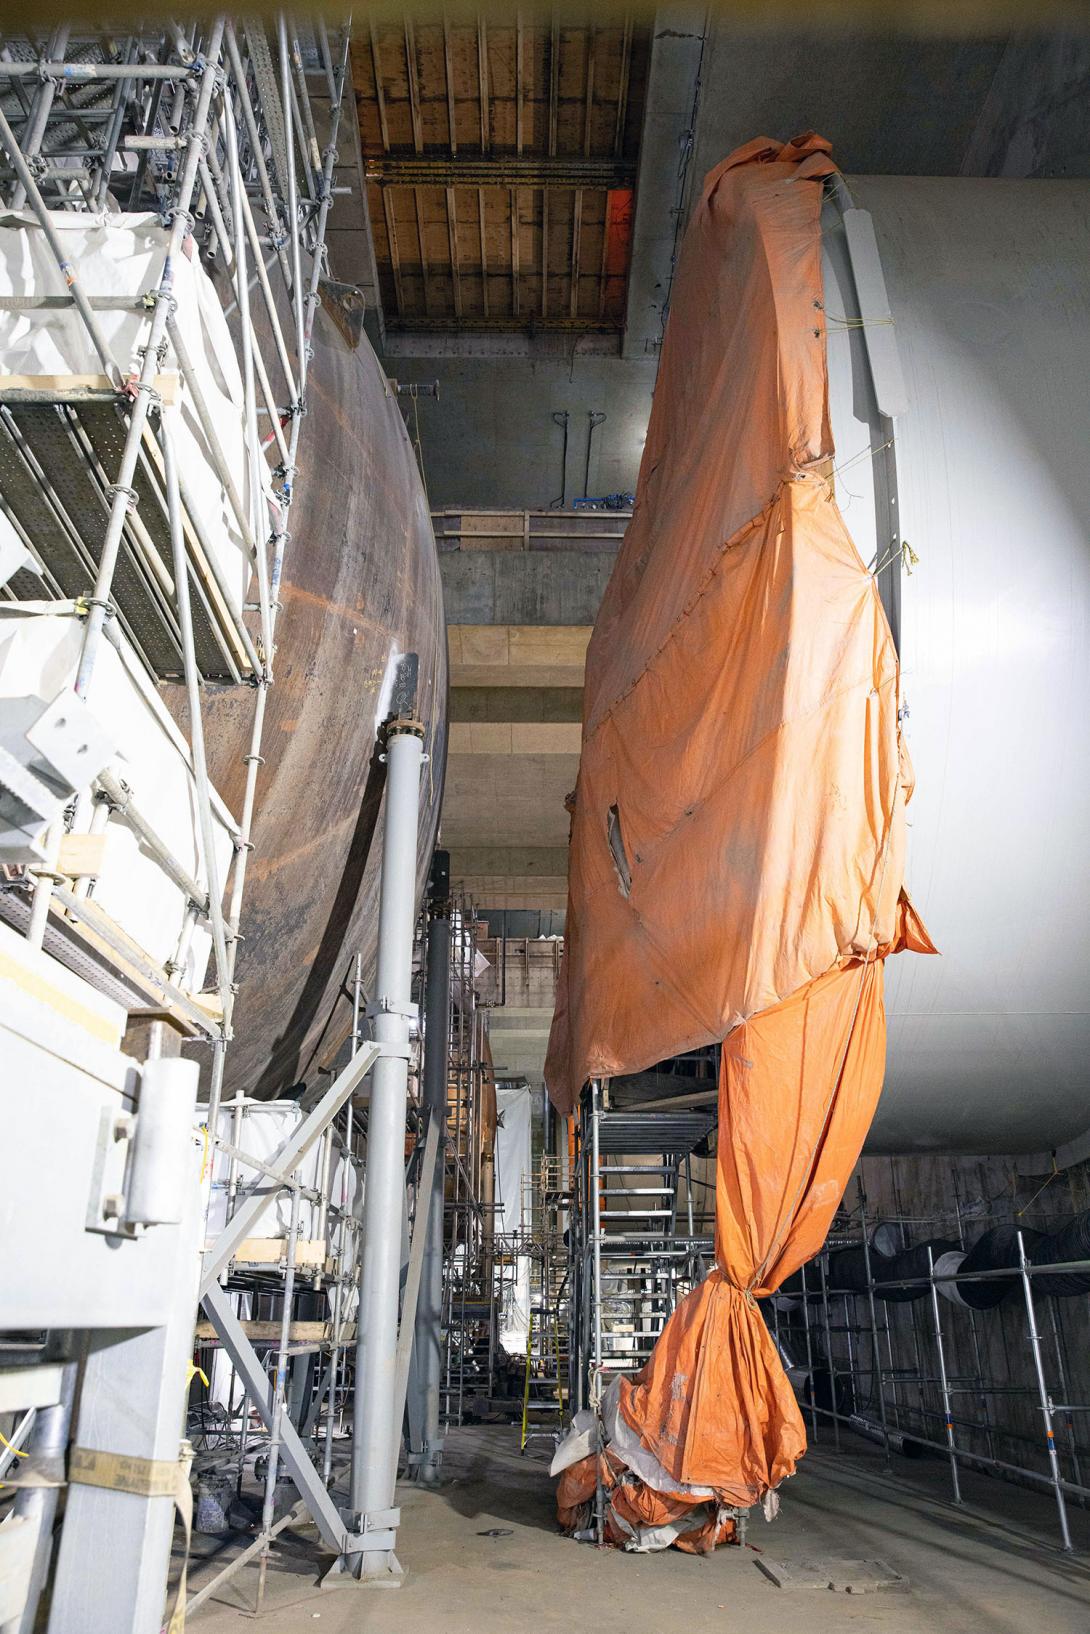 These two sections will be connected to allow water to flow from a penstock unit on the right into a turbine unit on the left. 